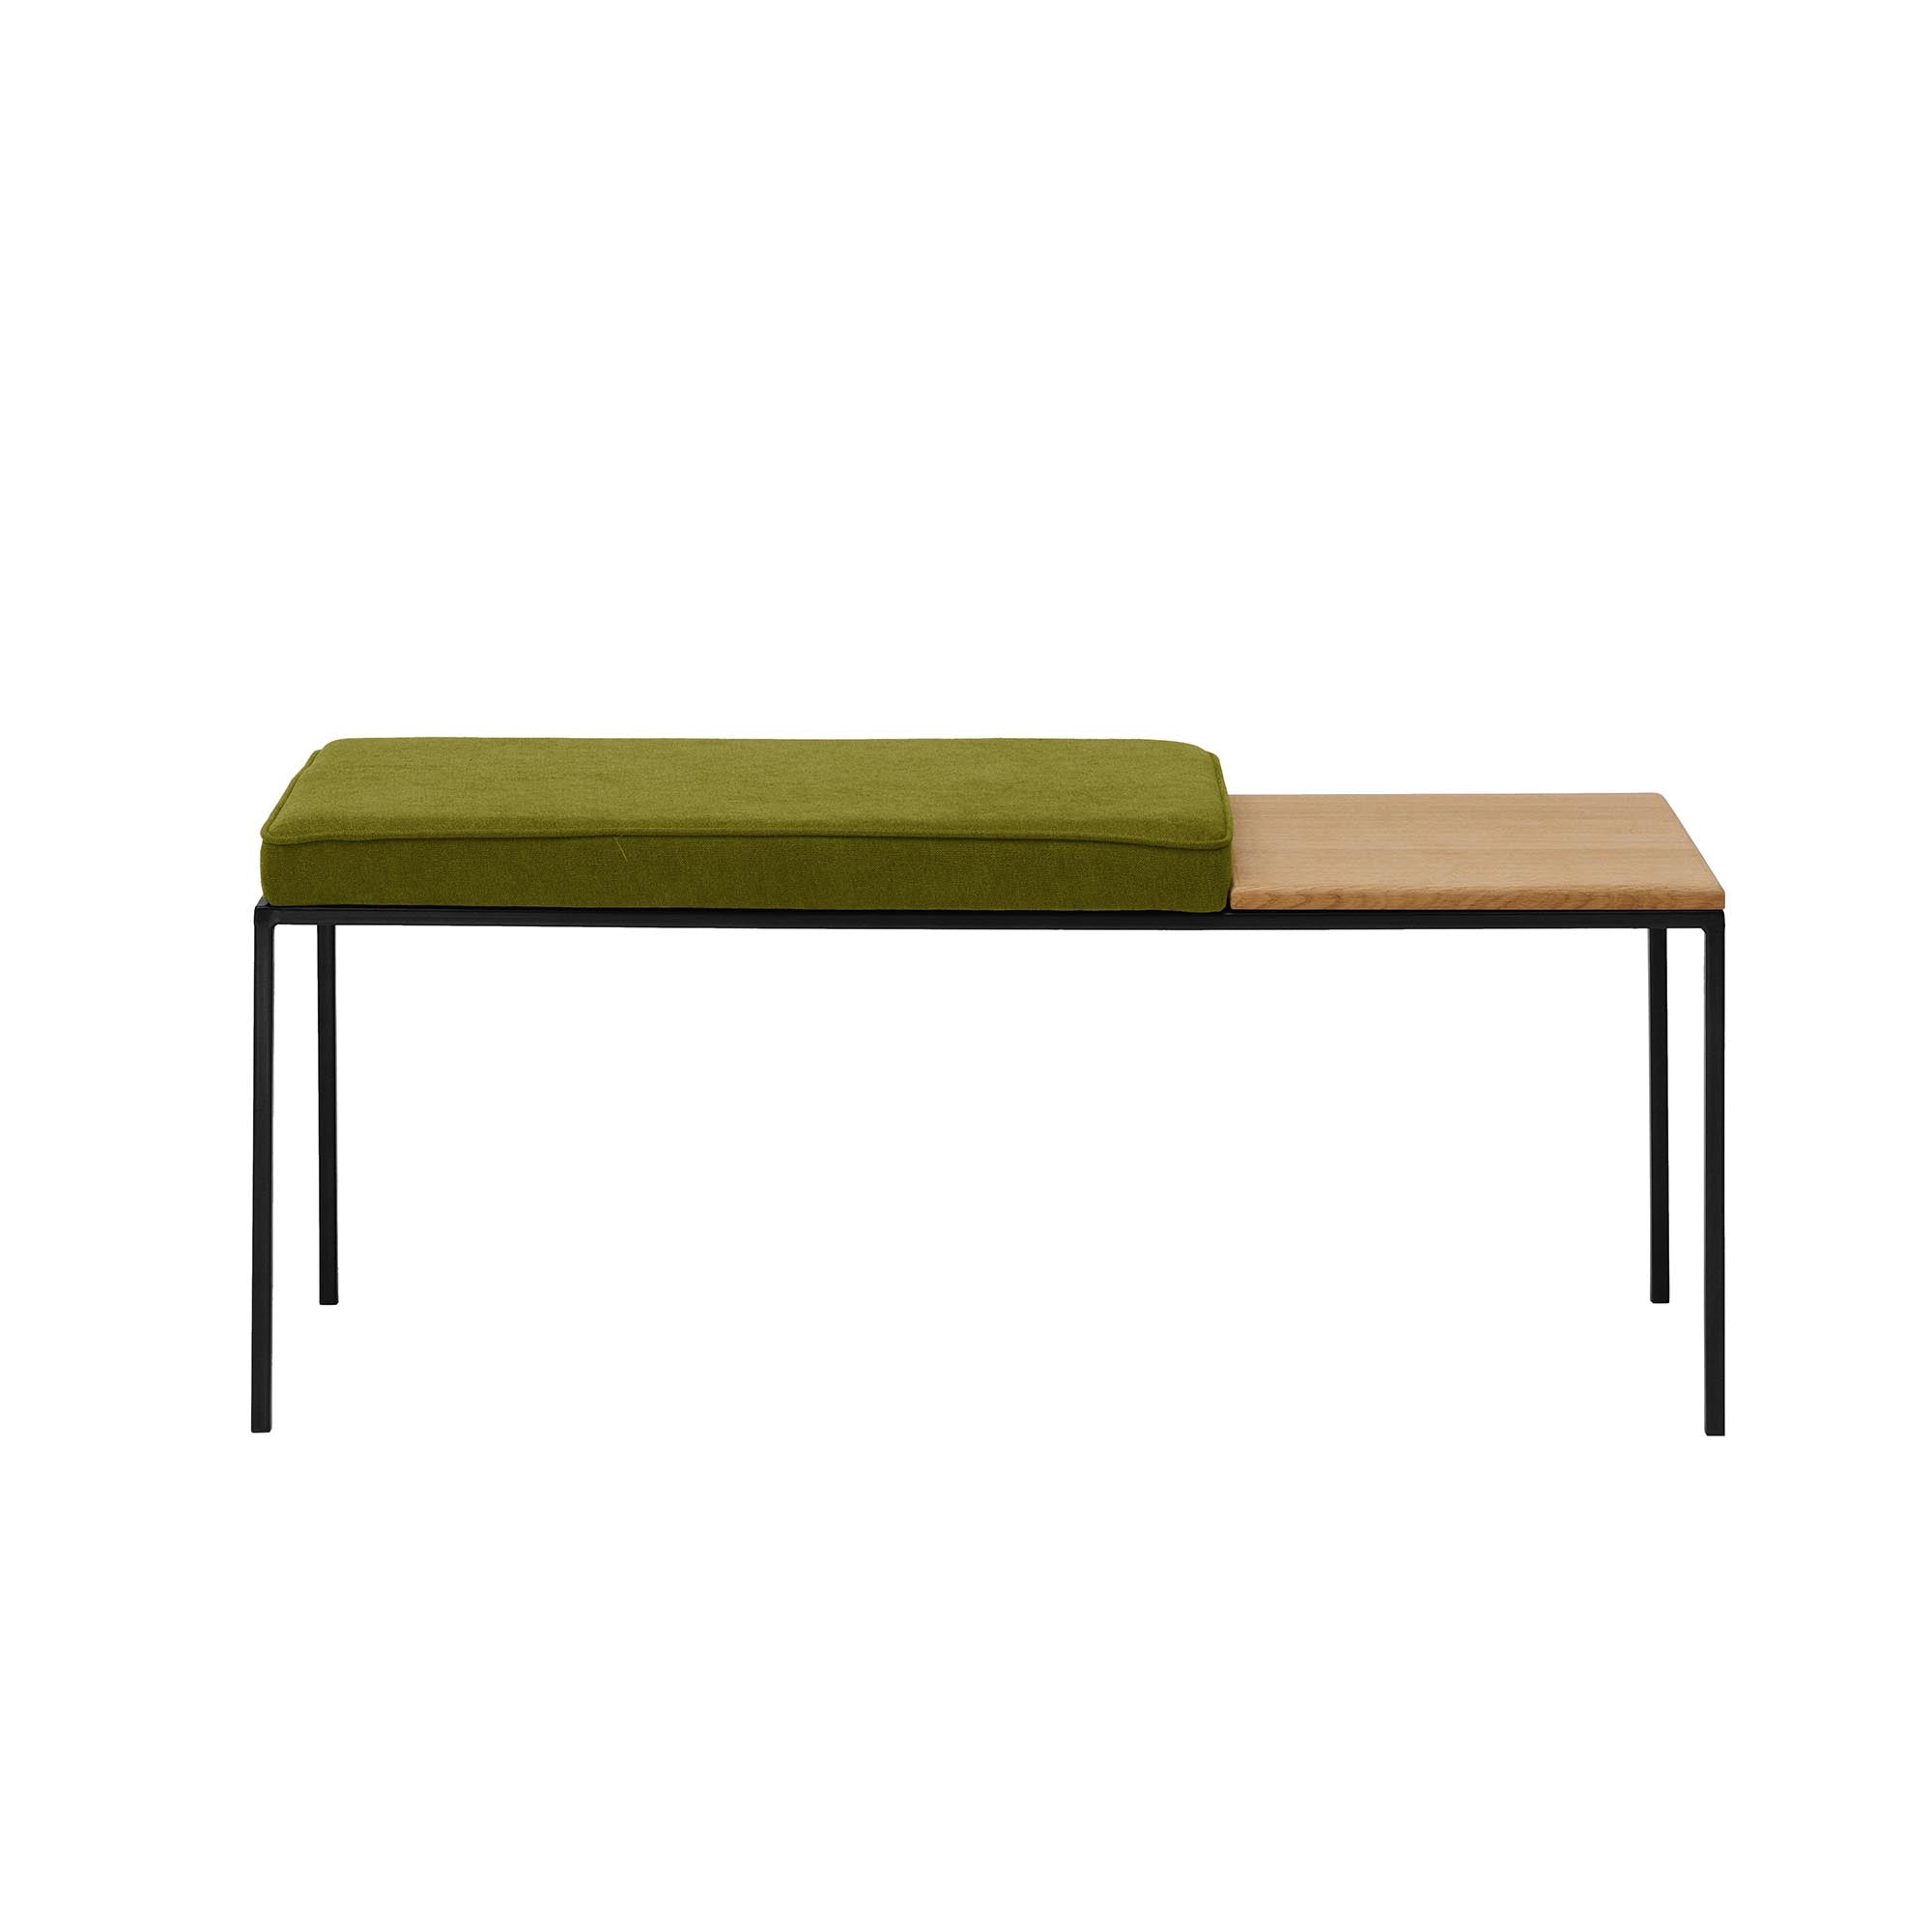 Oak Wood Seat, Natural Colour green fabric, black frame, front view